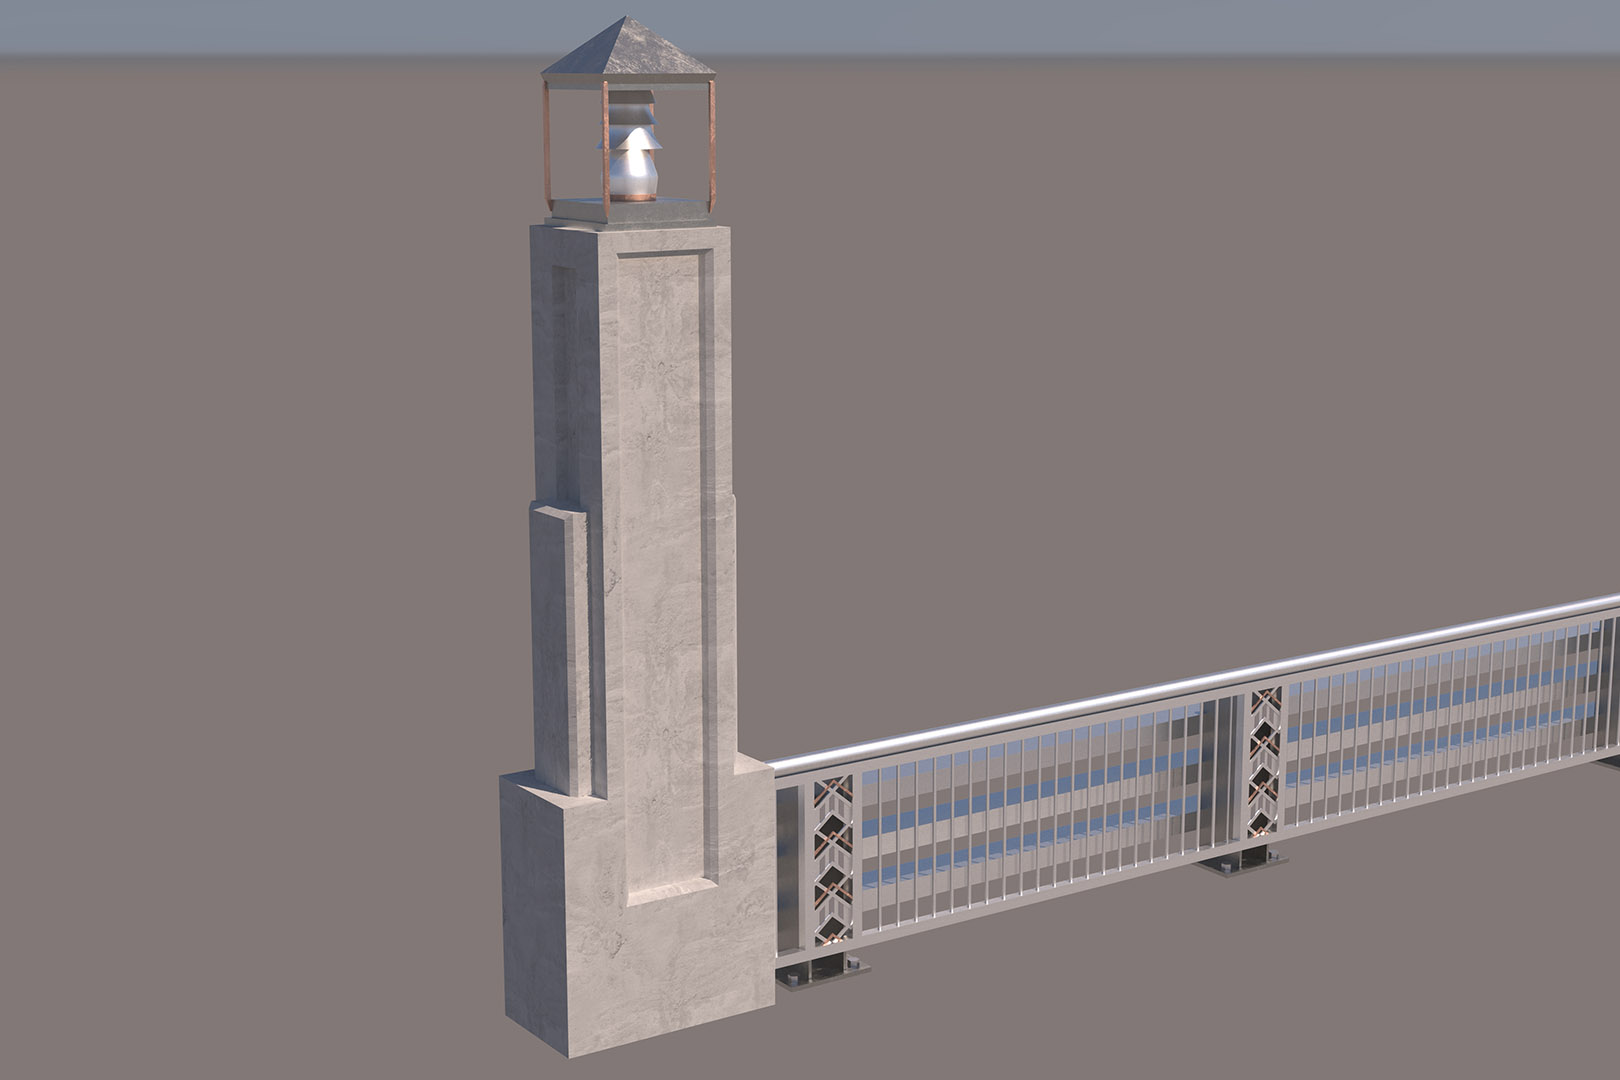 Rendering of Pylon with custom column light top at four corners of north and south bridges